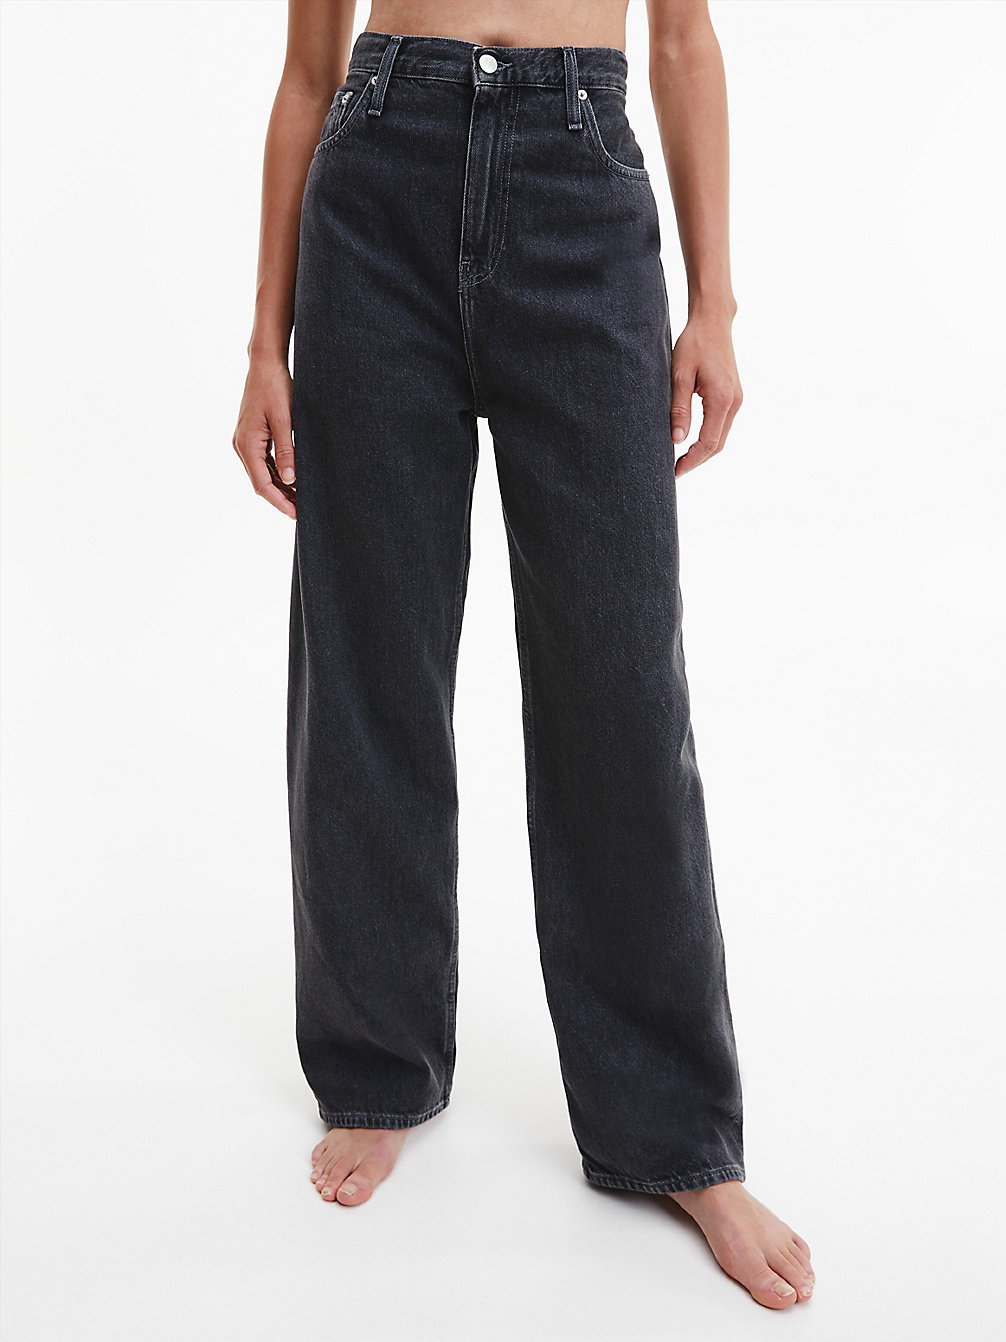 DENIM GREY > Jeansy High Rise Relaxed > undefined Kobiety - Calvin Klein